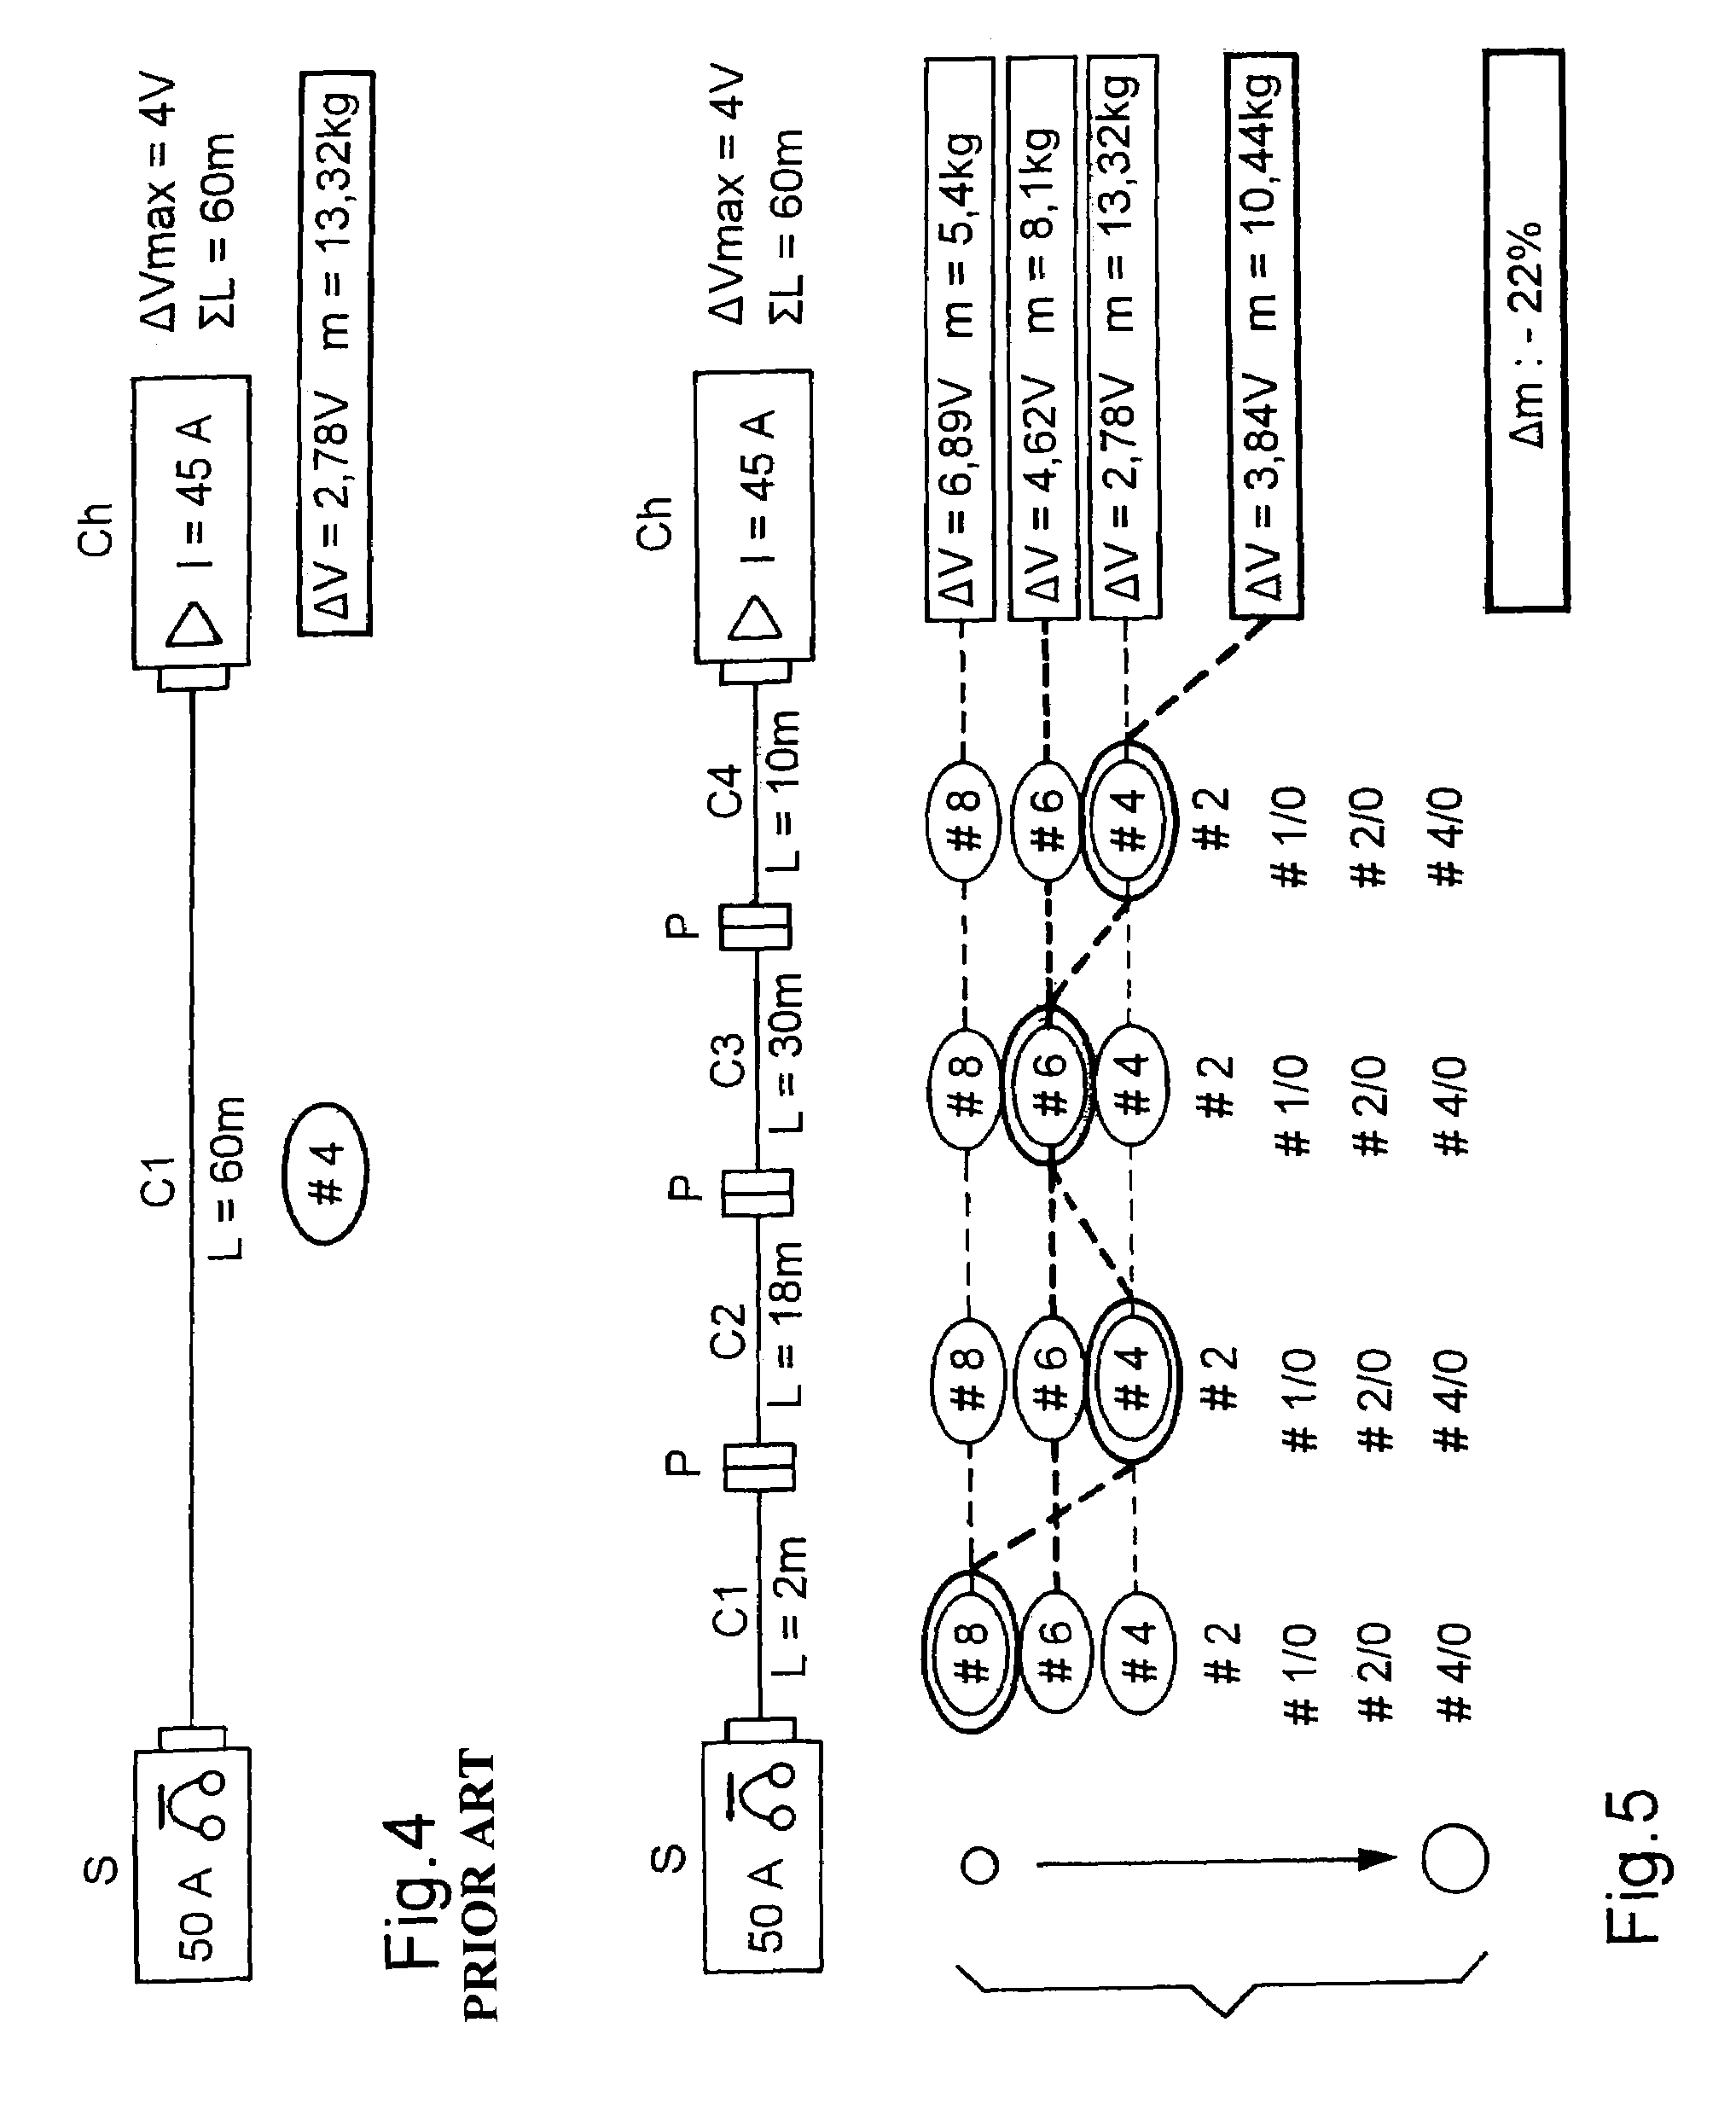 Method of optimizing an electrical cabling